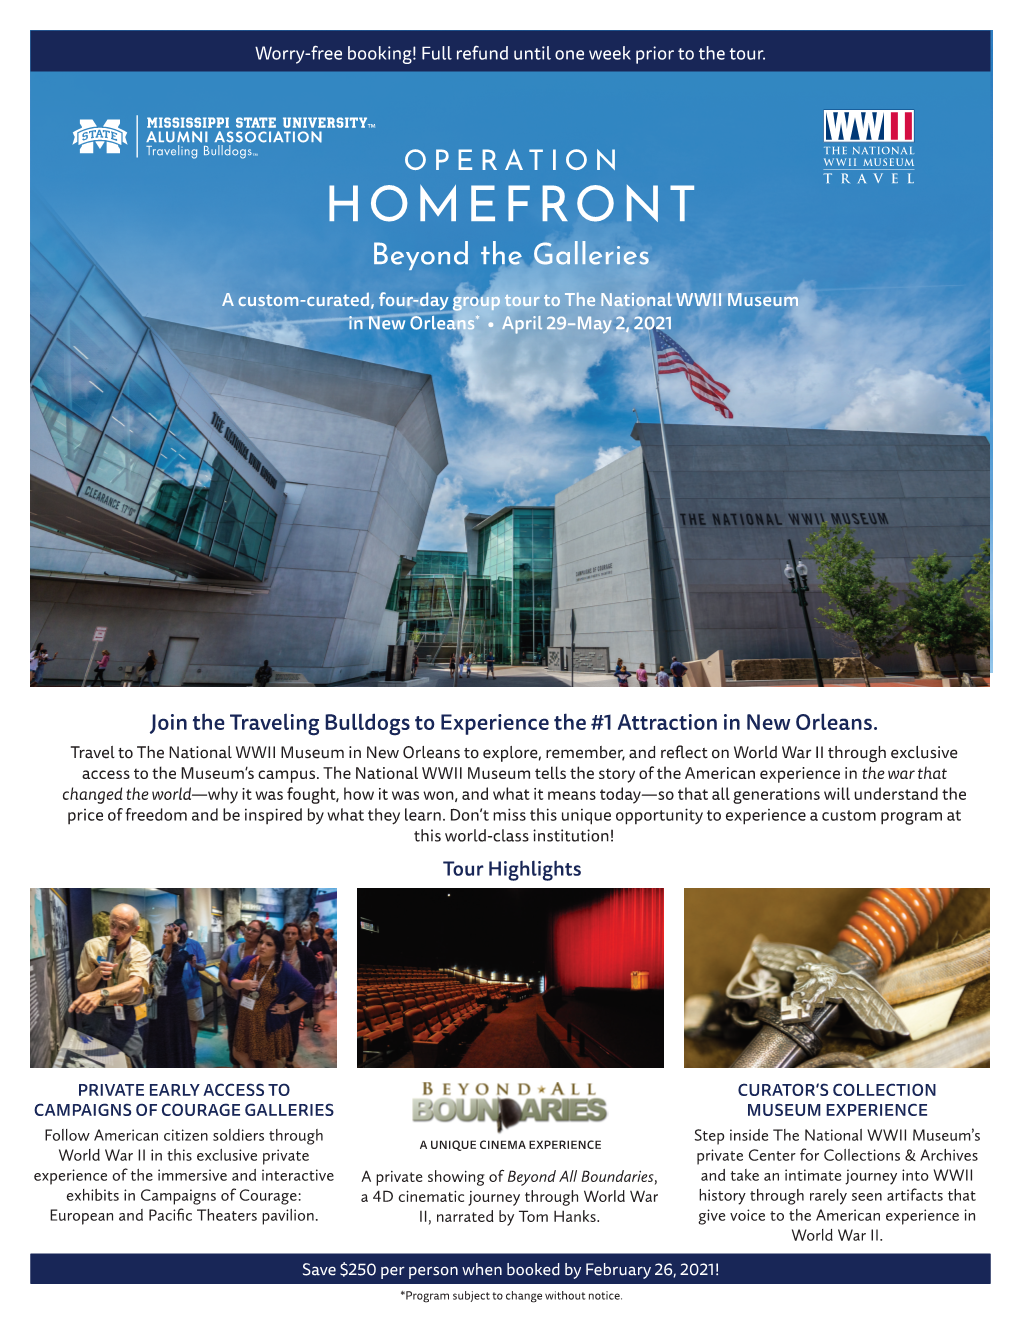 Operation Homefront at the WWII Museum